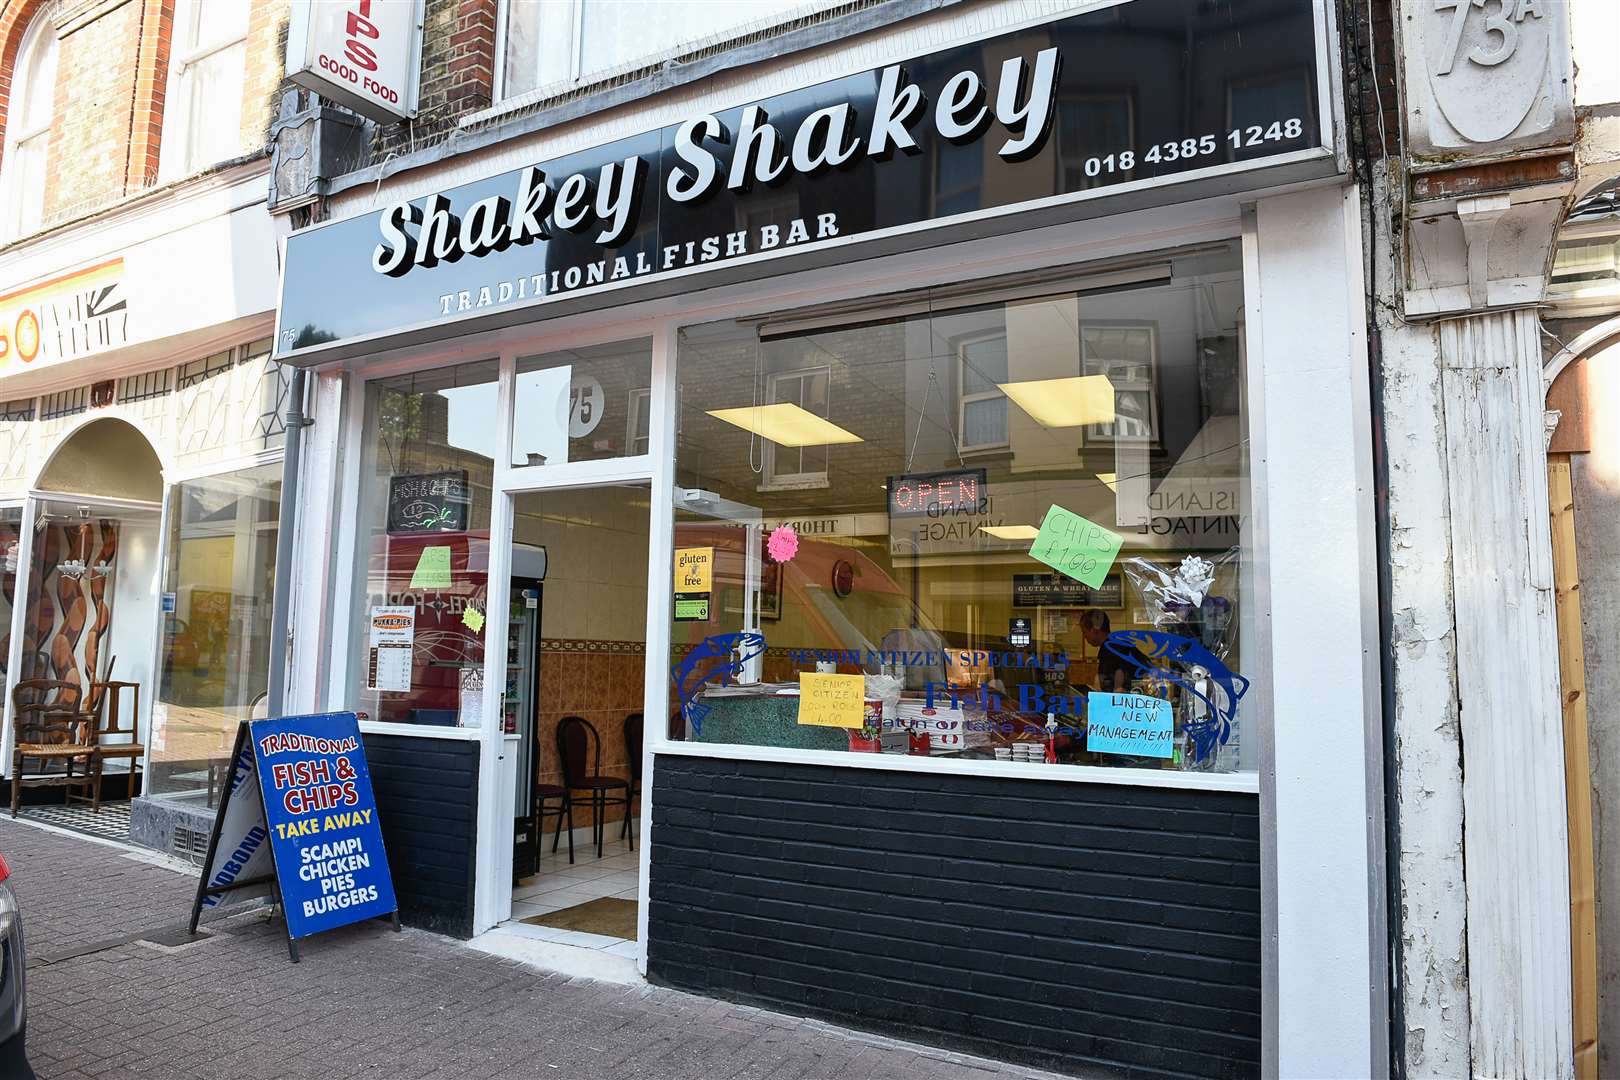 Shakey Shakey was full of customers when a fryer caught fire. Picture: Alan Langley